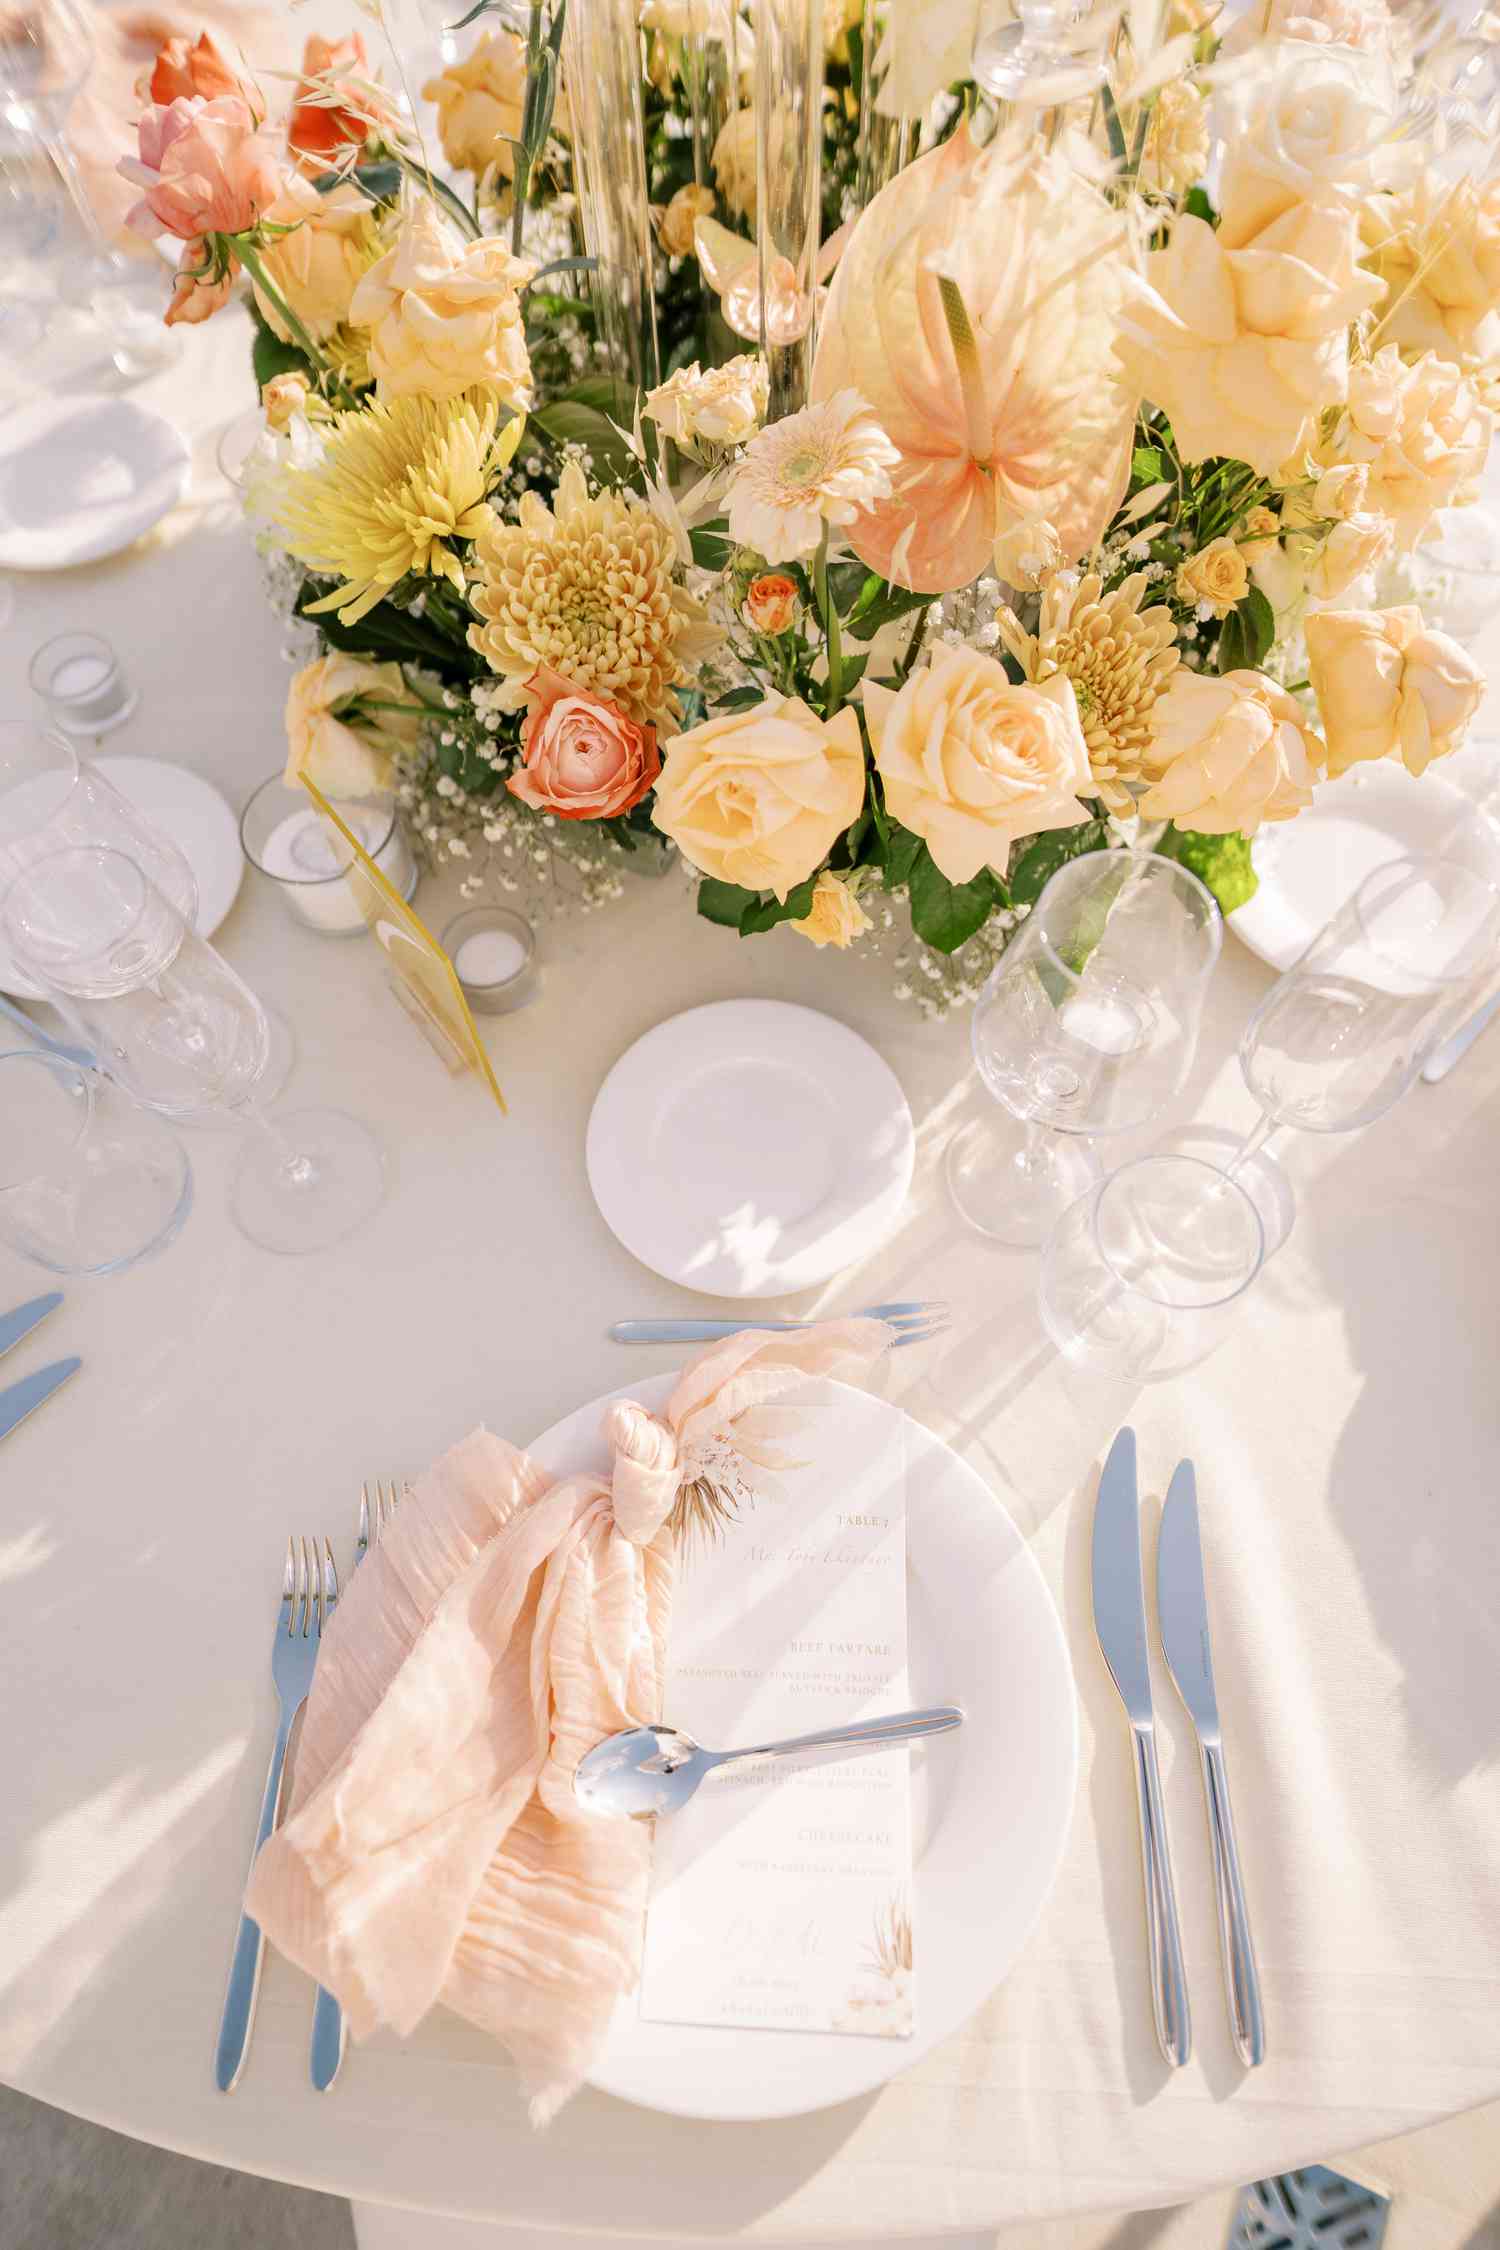 place settings with pops of orange